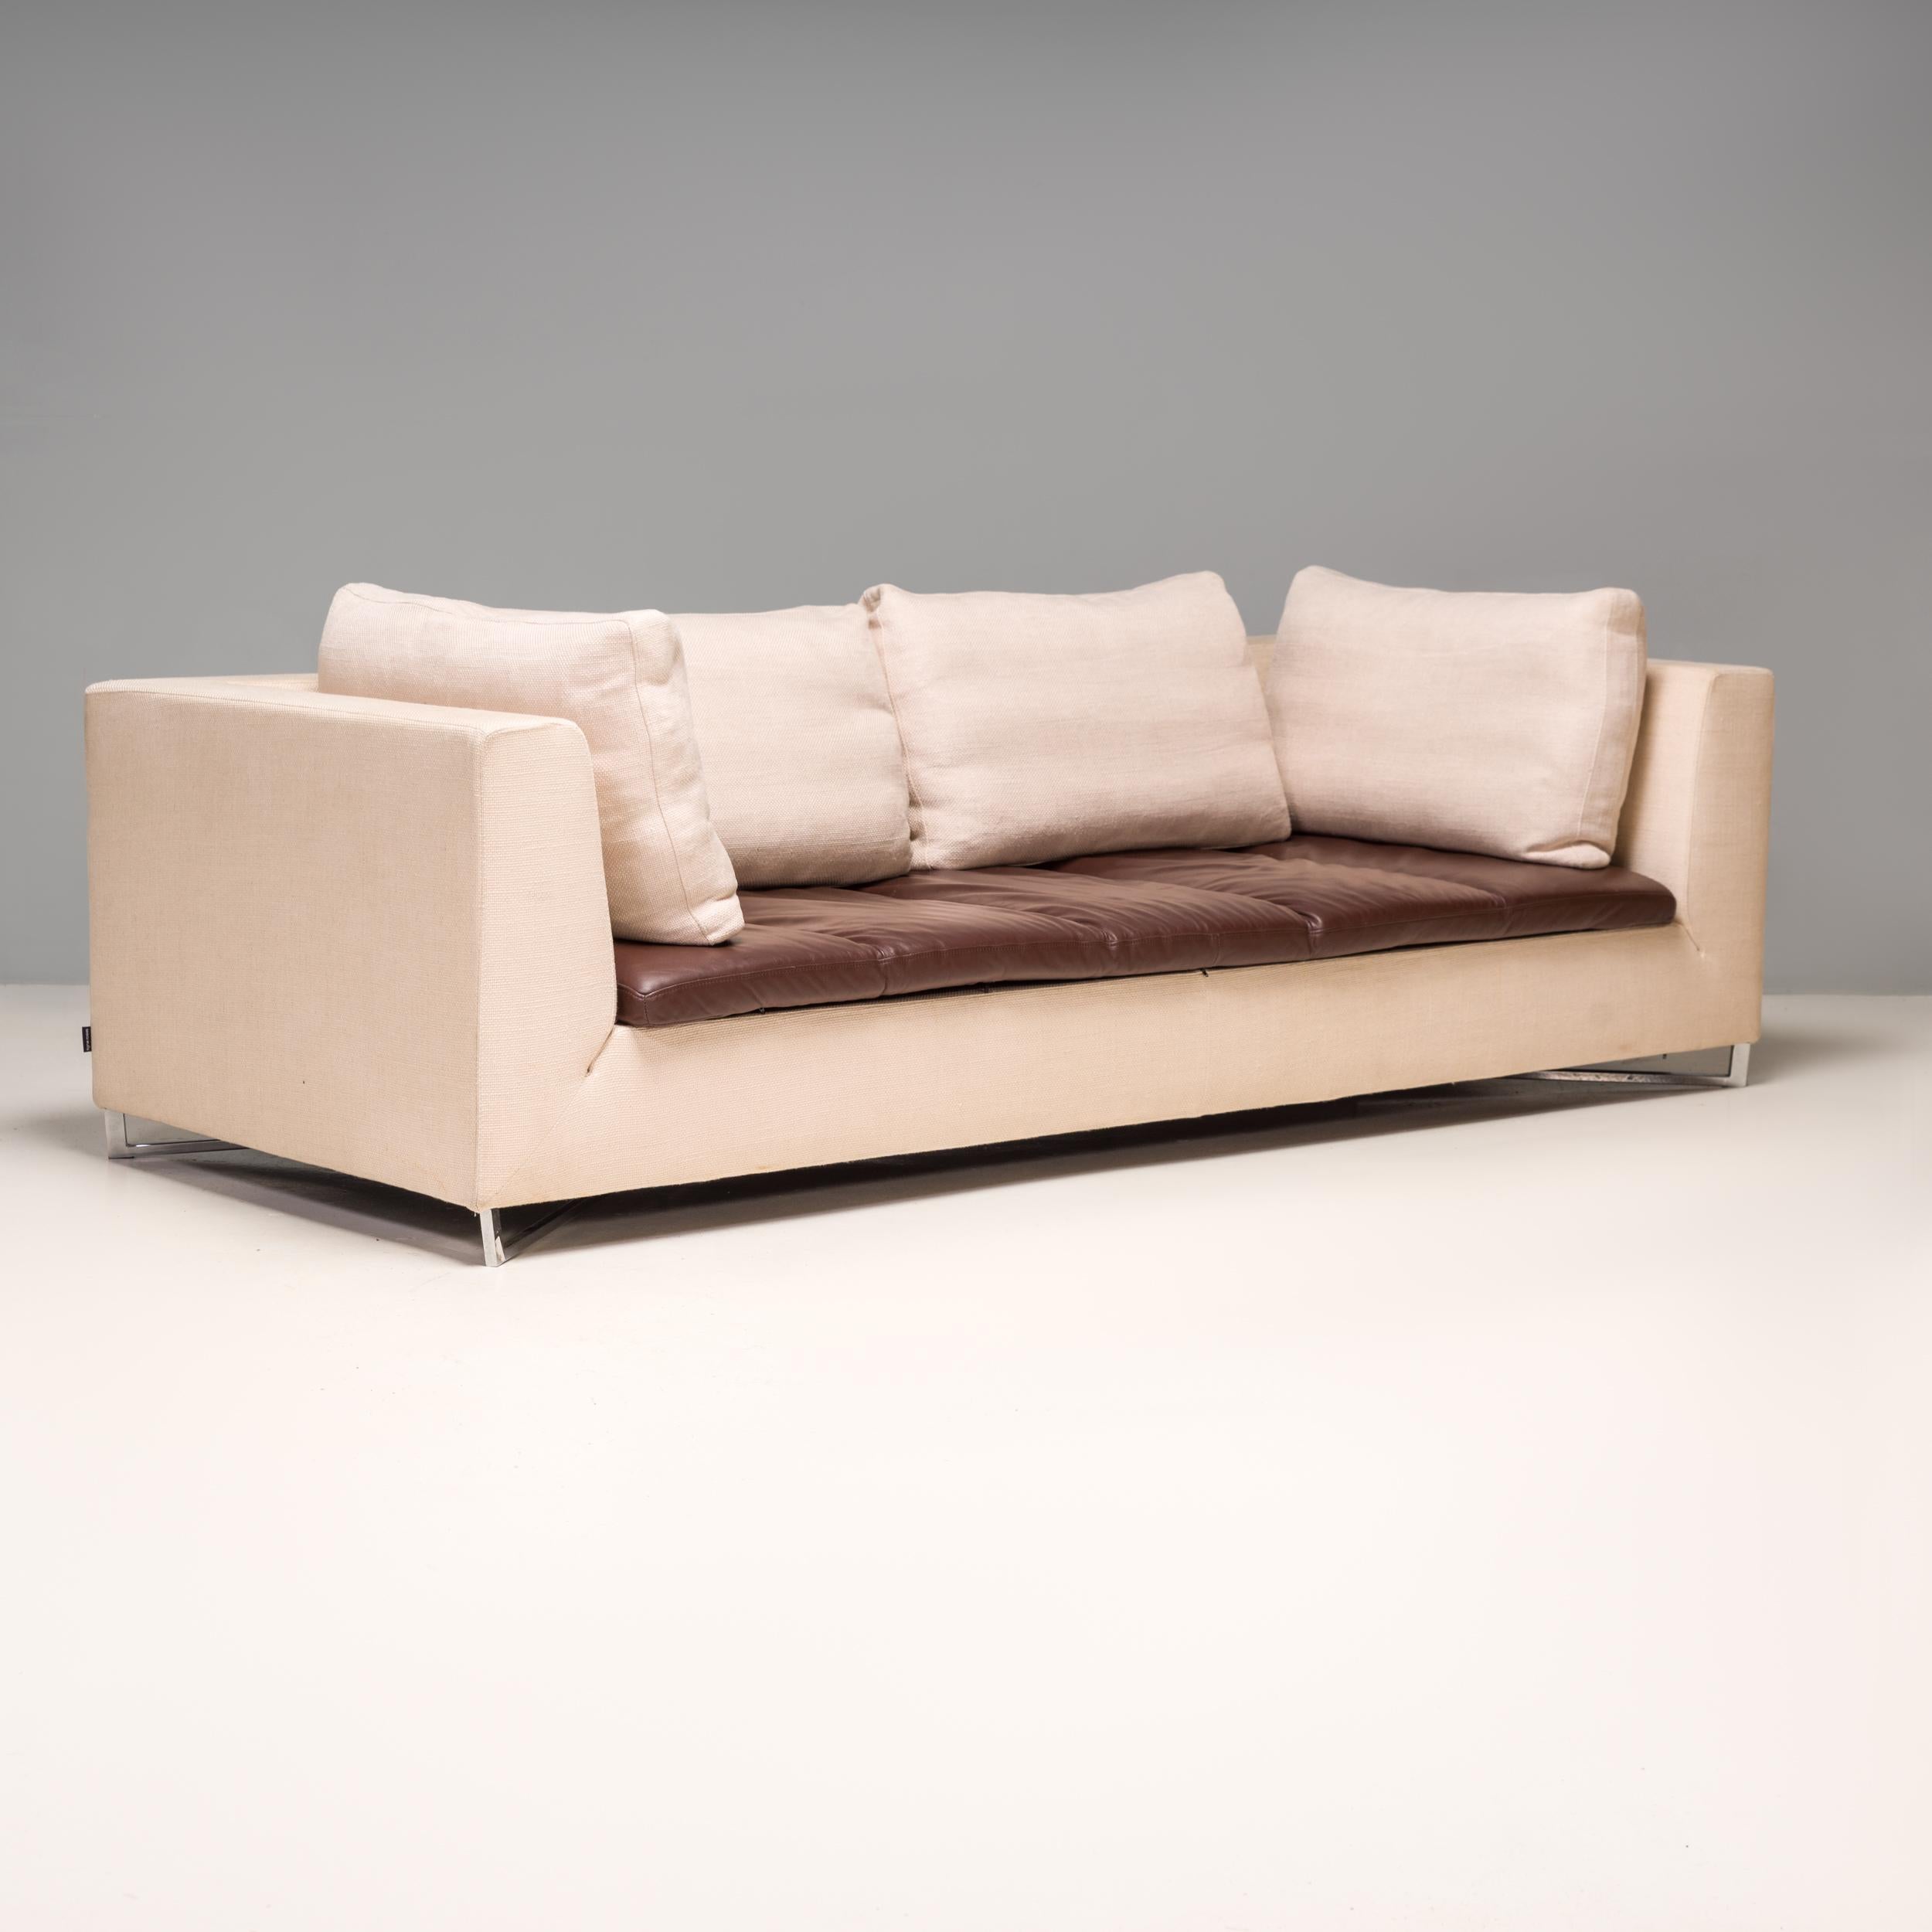 Designed by Didier Gomez for Ligne Roset, this Feng three-seat sofa combines modern elegance with ultimate comfort.

The sturdy frame is upholstered in ivory woven fabric and sits on an angular chrome base. 

The fabric is contrasted by the quilted